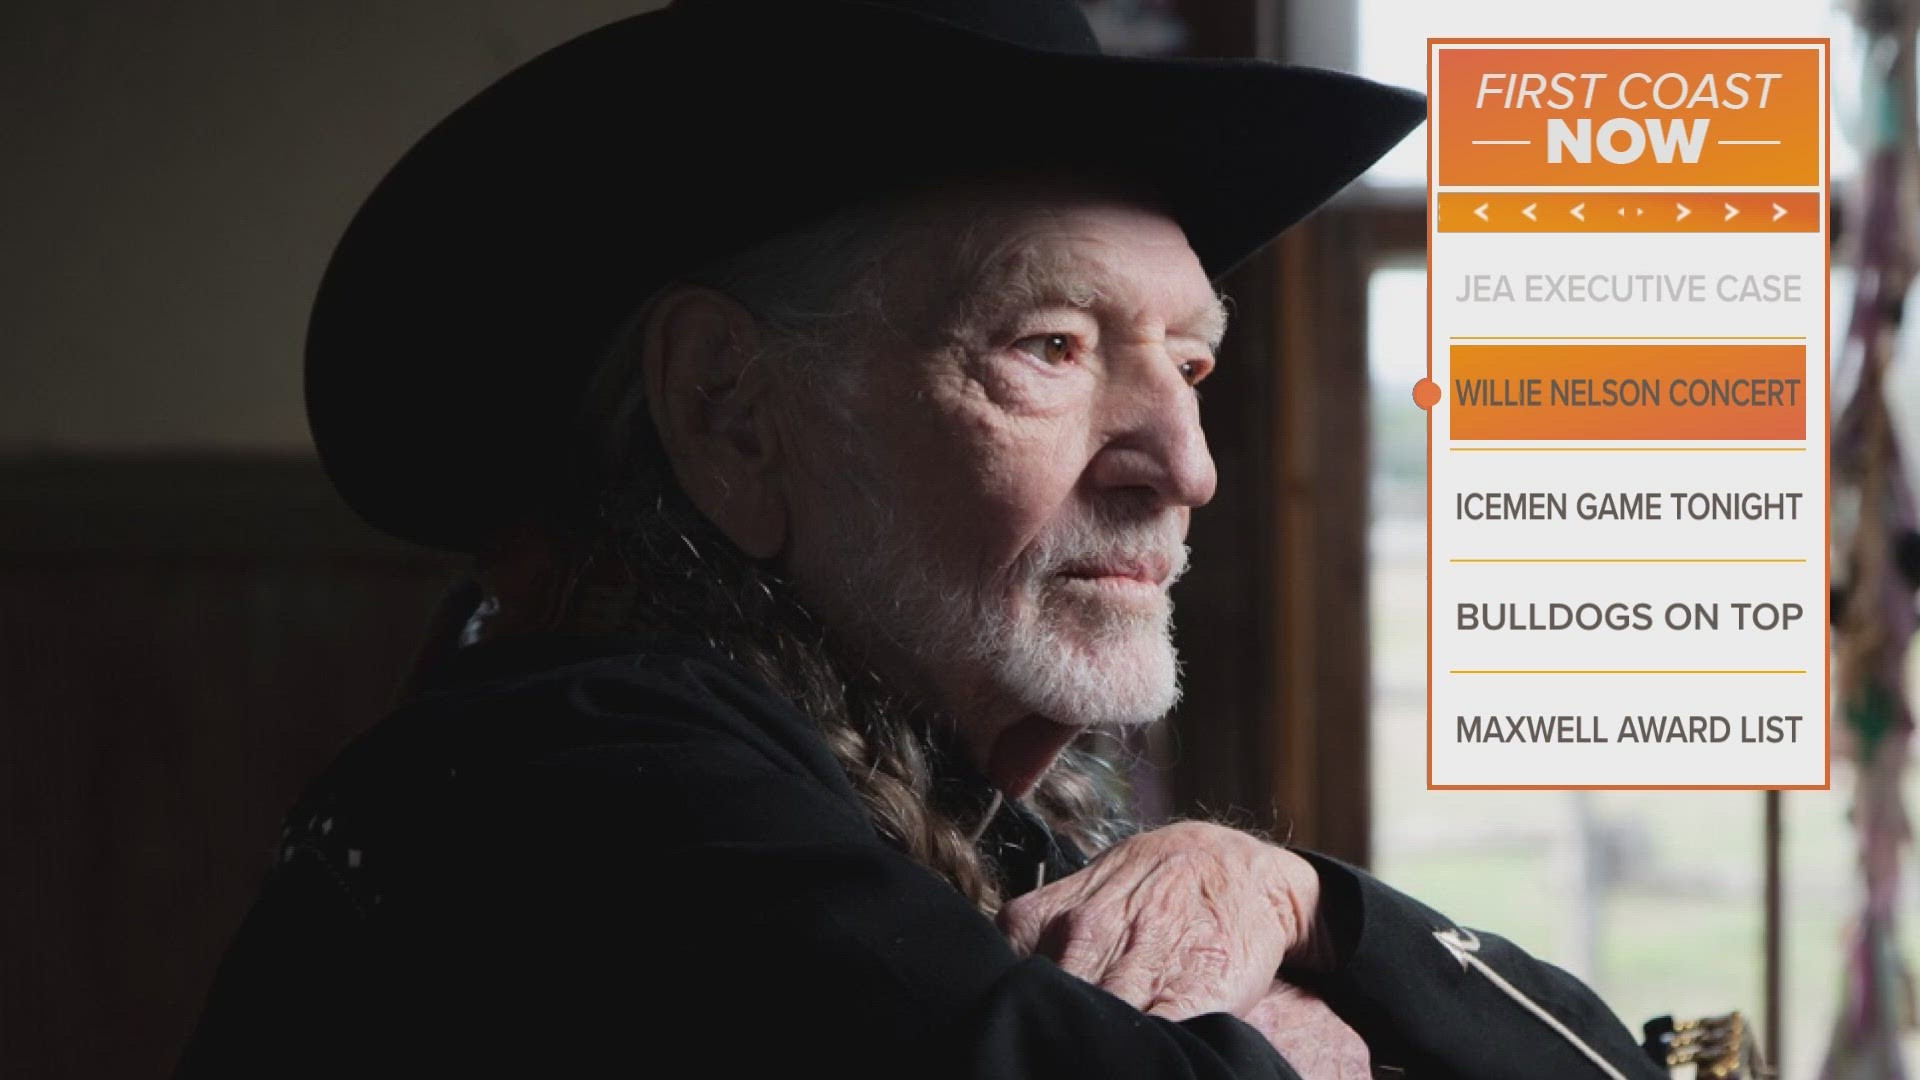 The legendary Willie Nelson & Family will be playing in St. Augustine in February. Tickets go on sale Friday.